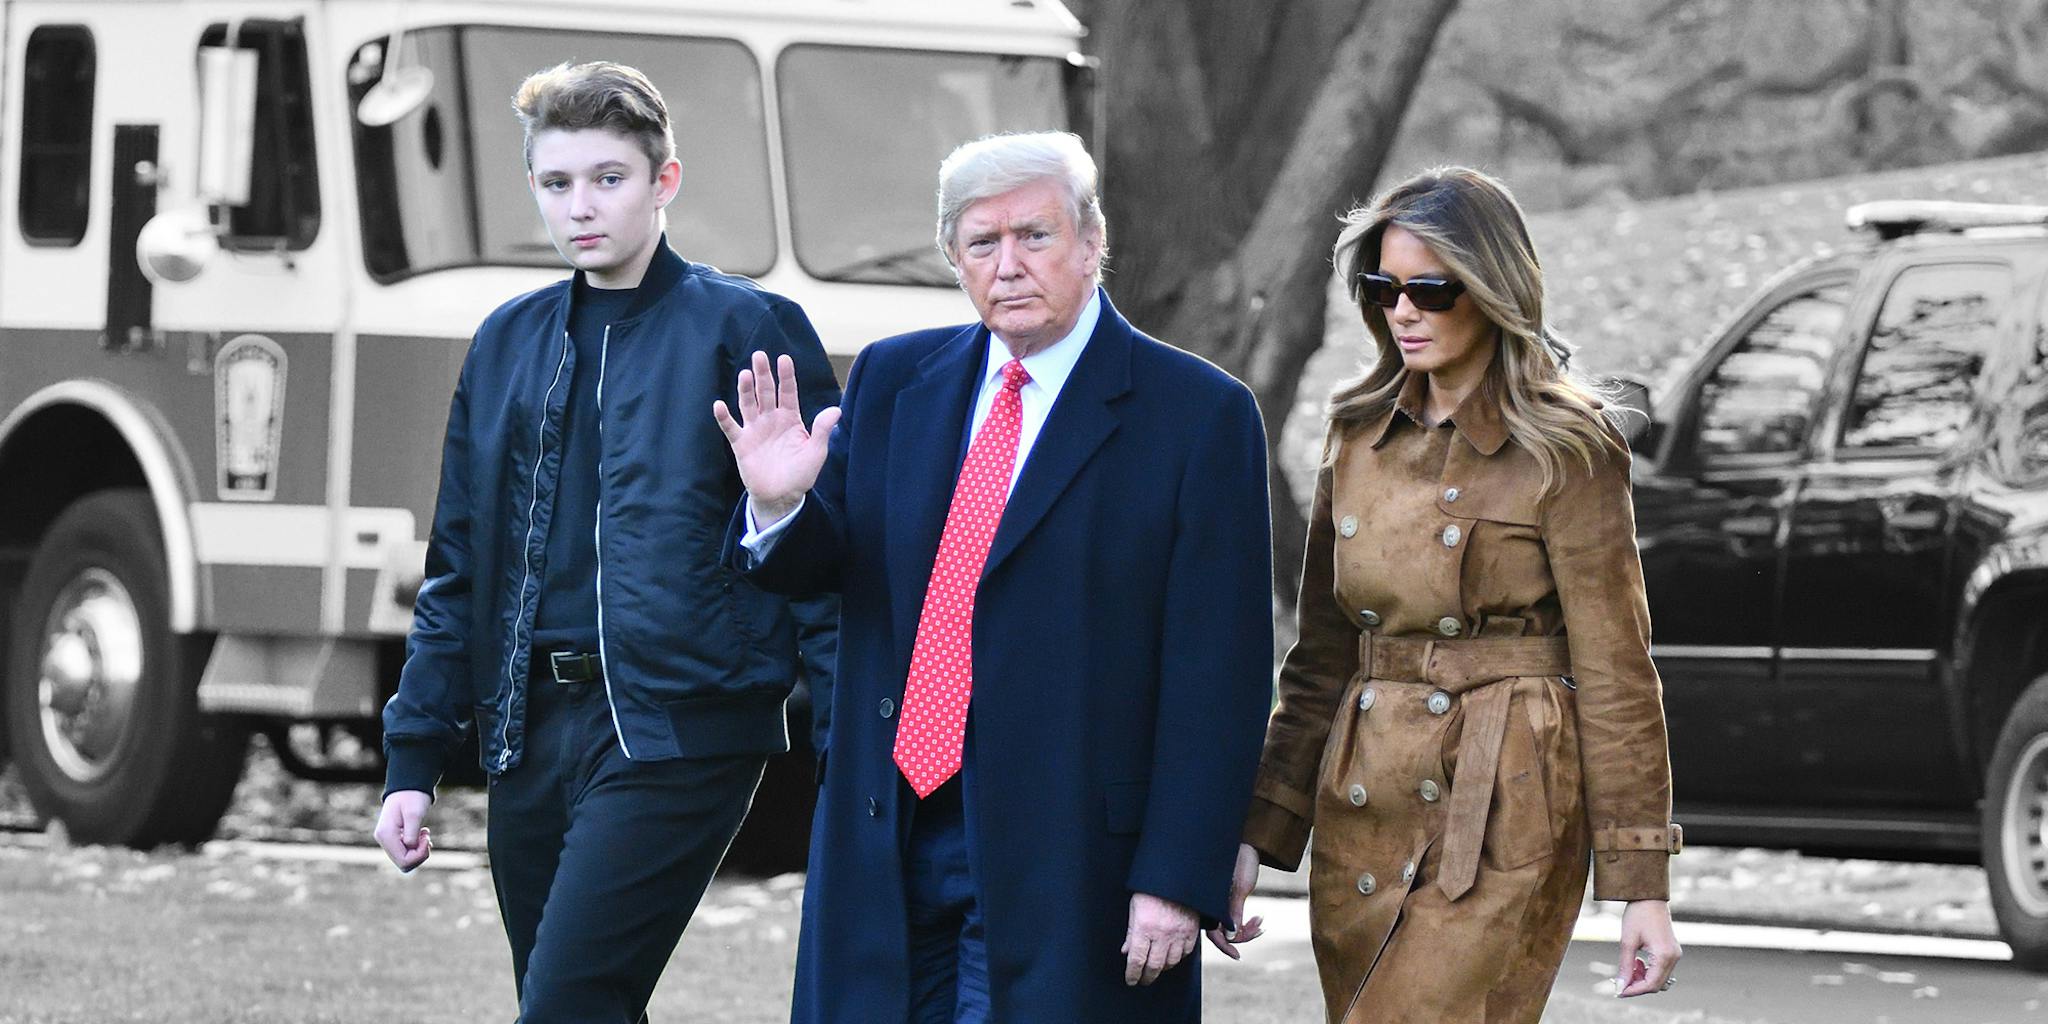 How Tall Is Barron Trump? At Least 6'7" These Days